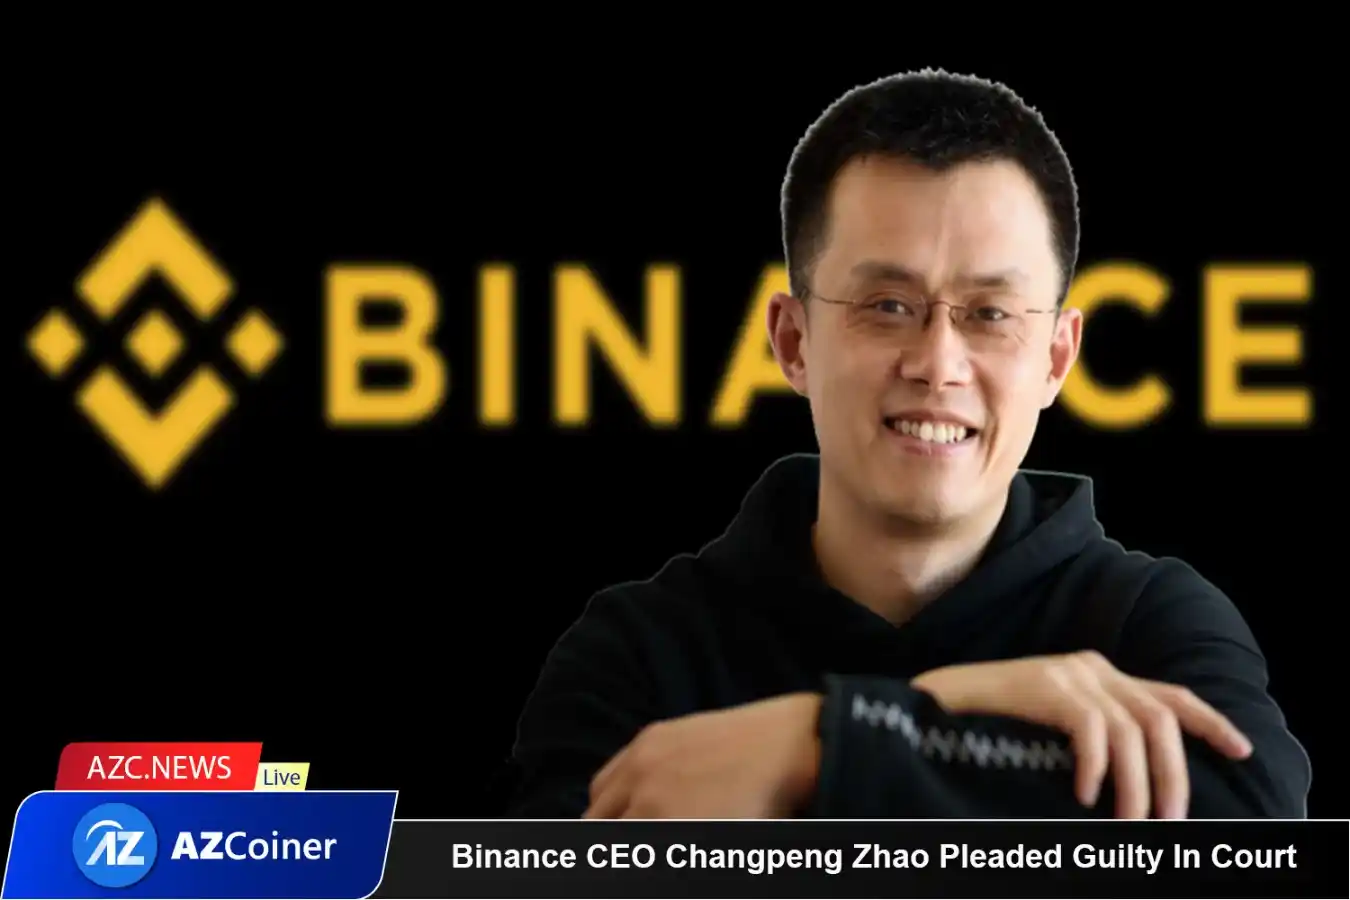 The Us Court Accepted The Guilty Plea Of Former Binance Ceo Changpeng Zhao_65b97d3dc2c89.webp